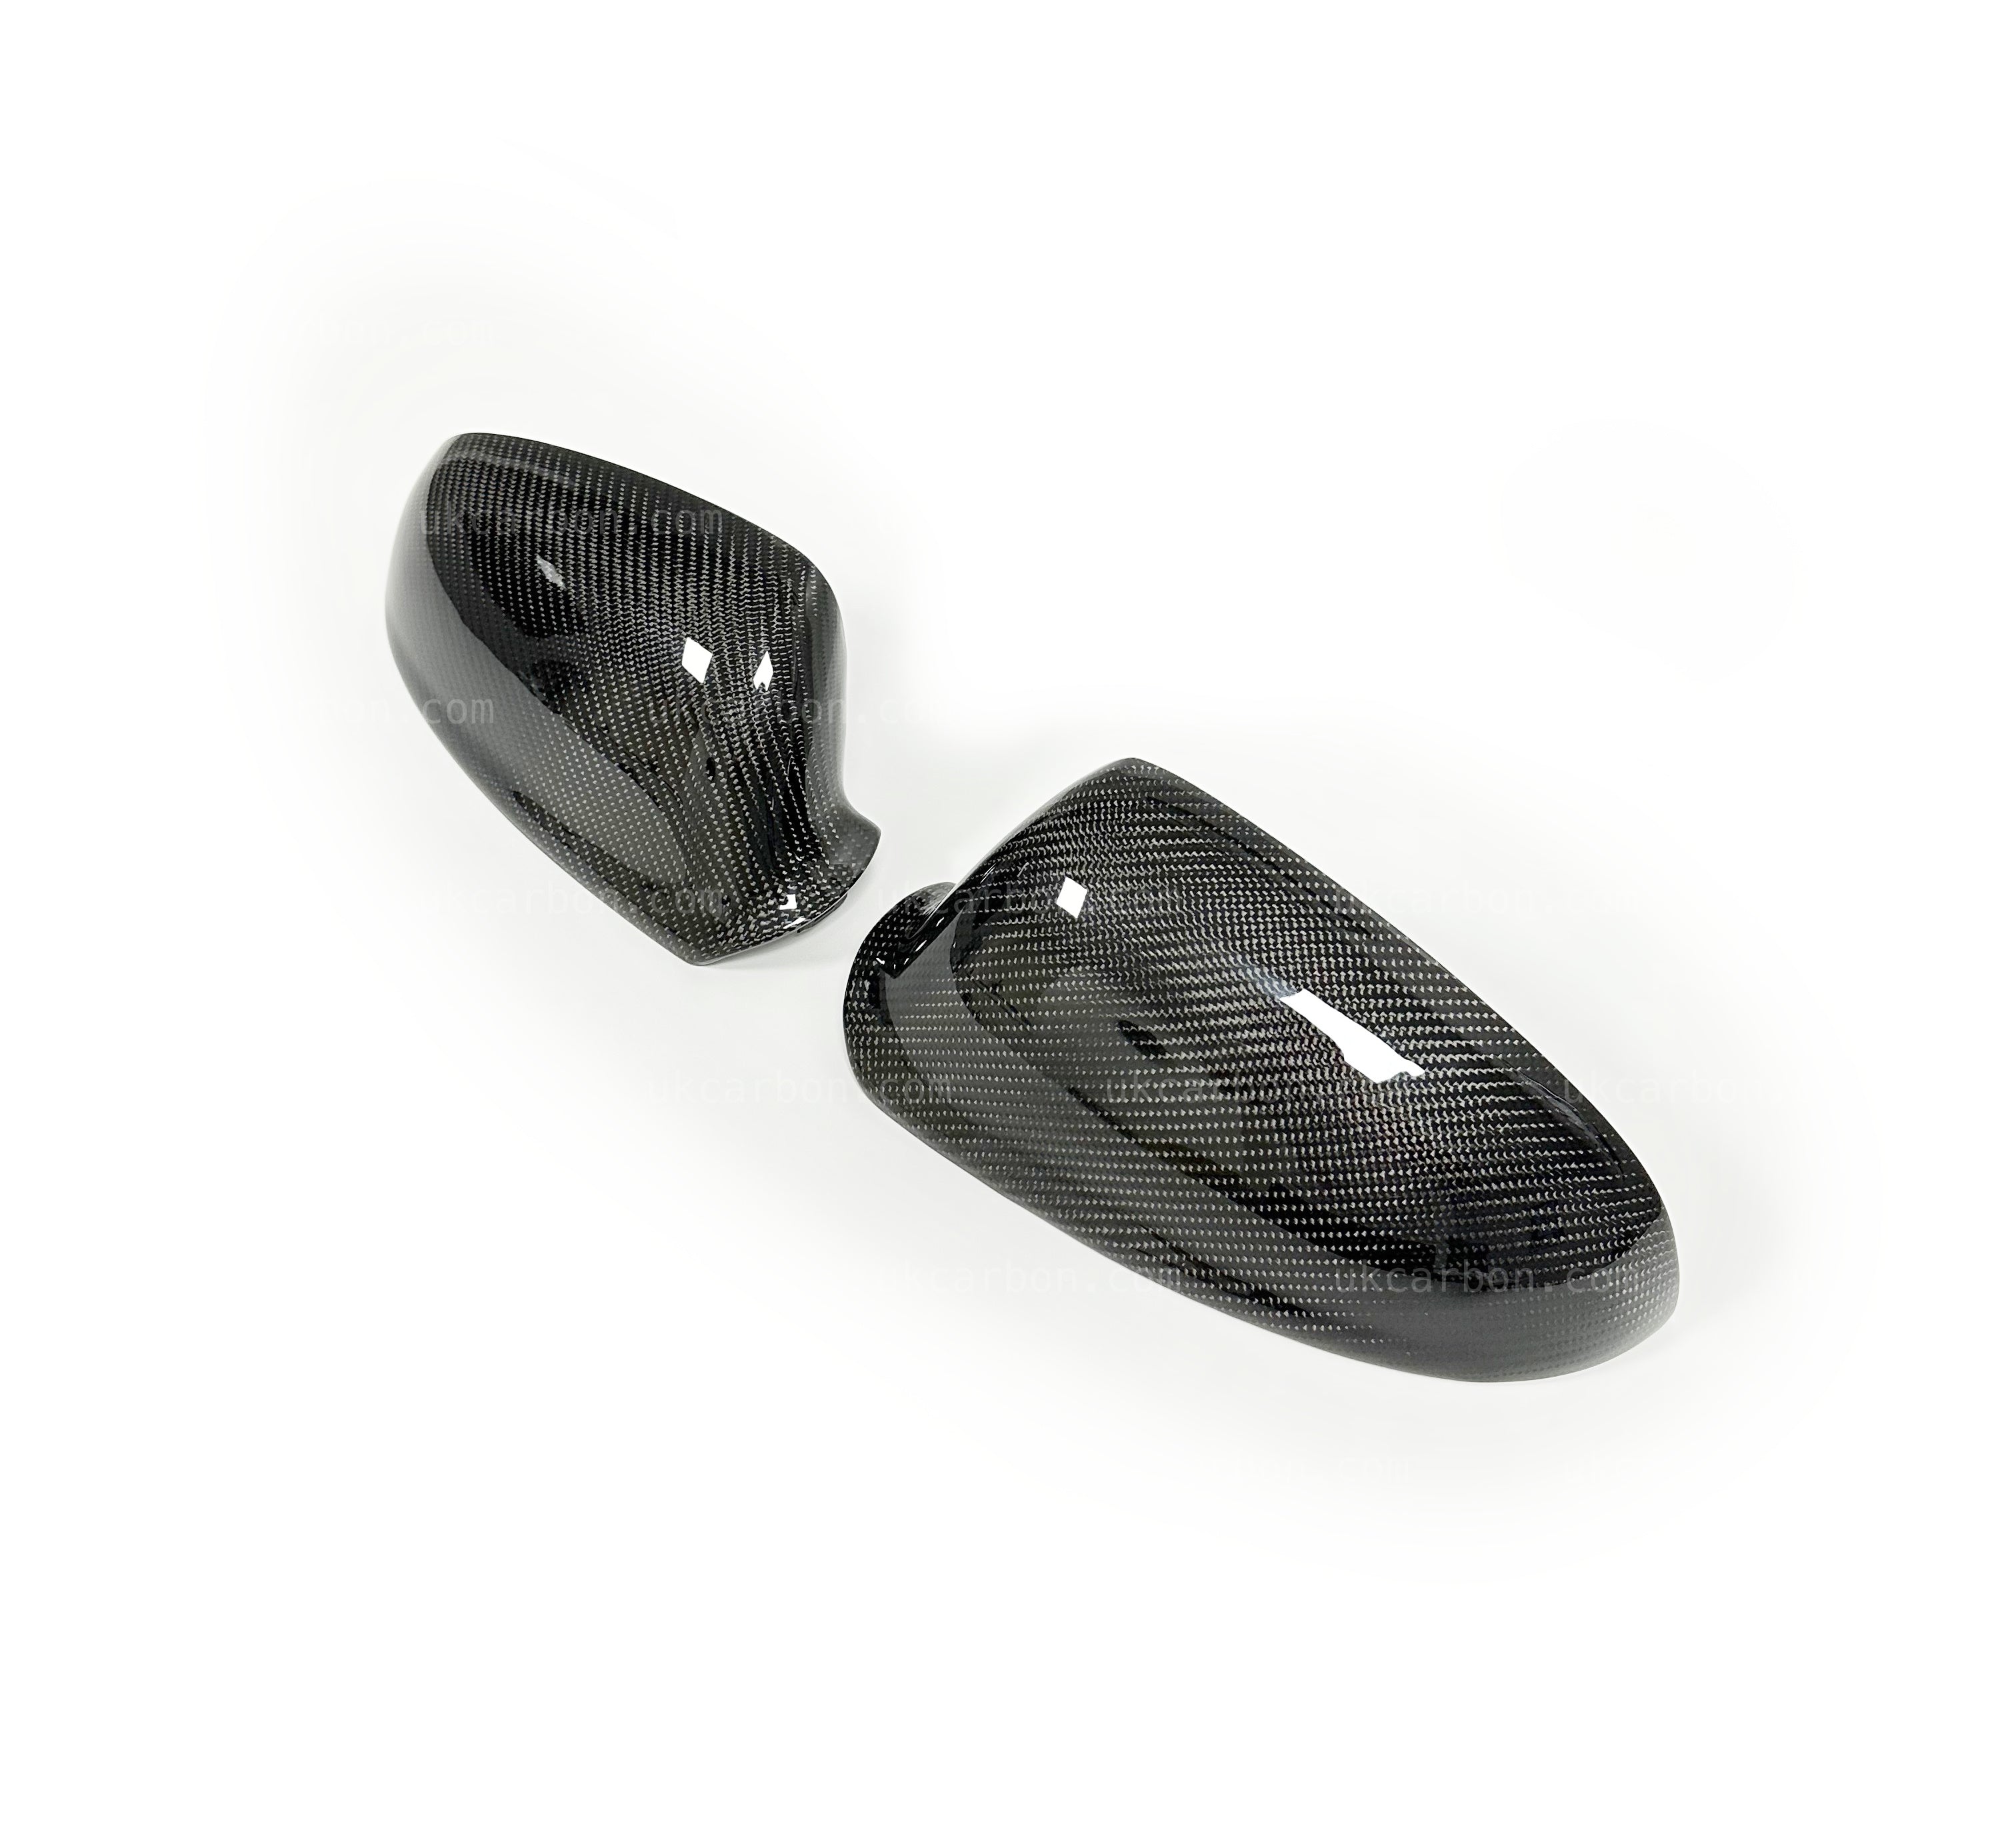 Vauxhall Astra Carbon Mirror Wing Cover Replacement J inc VXR by UKCarbon